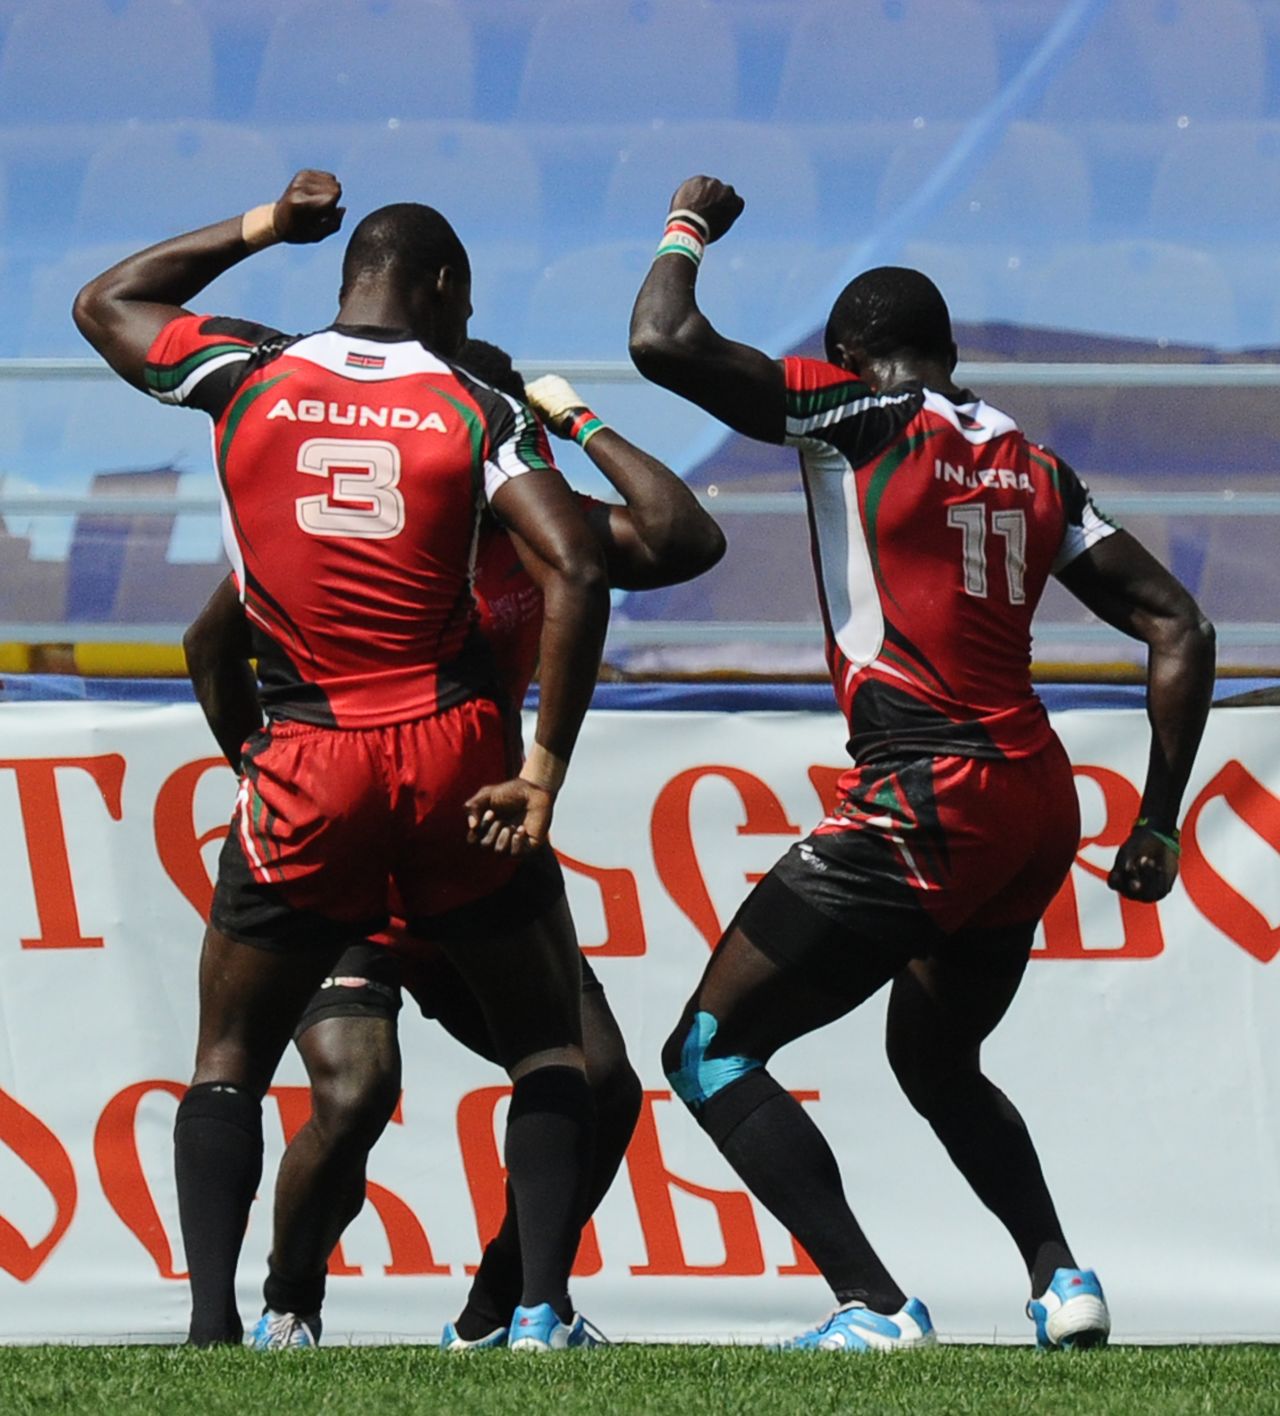 Kenya have become firm favorites on the sevens circuit, partly due to their exuberant post-match dancing celebrations.